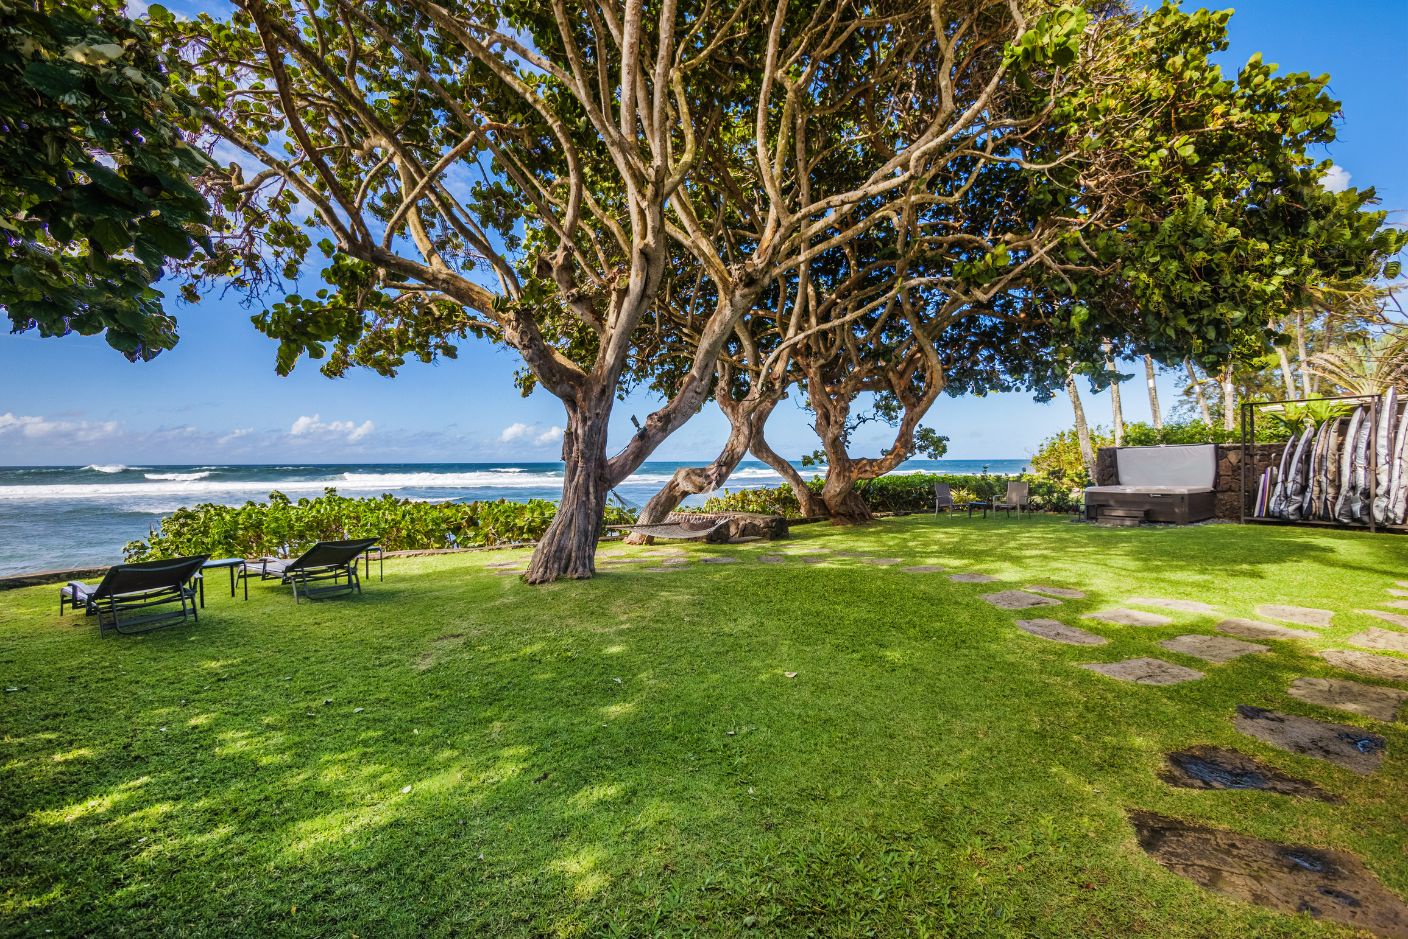 Haleiwa Vacation Rentals, Sunset Point Hawaiian Beachfront** - Shades of trees in the backyard to soothe the island summer heat.